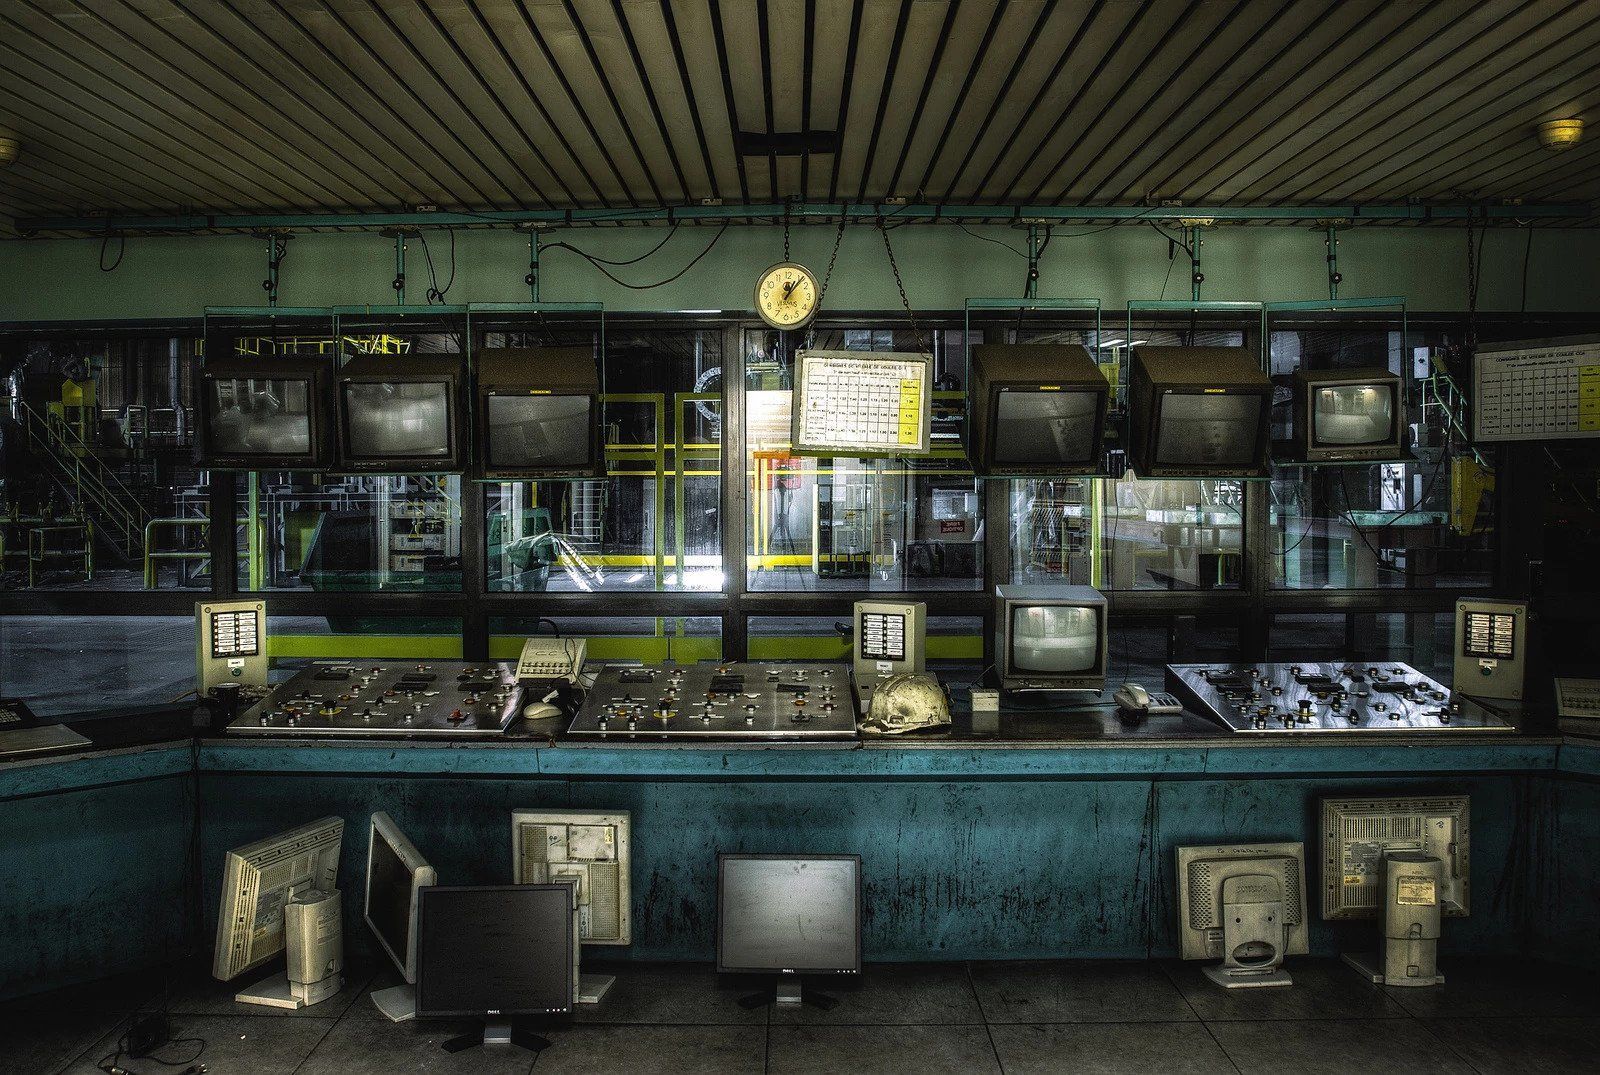 Abandoned control room for a steelworks in Chaleroi Belgium